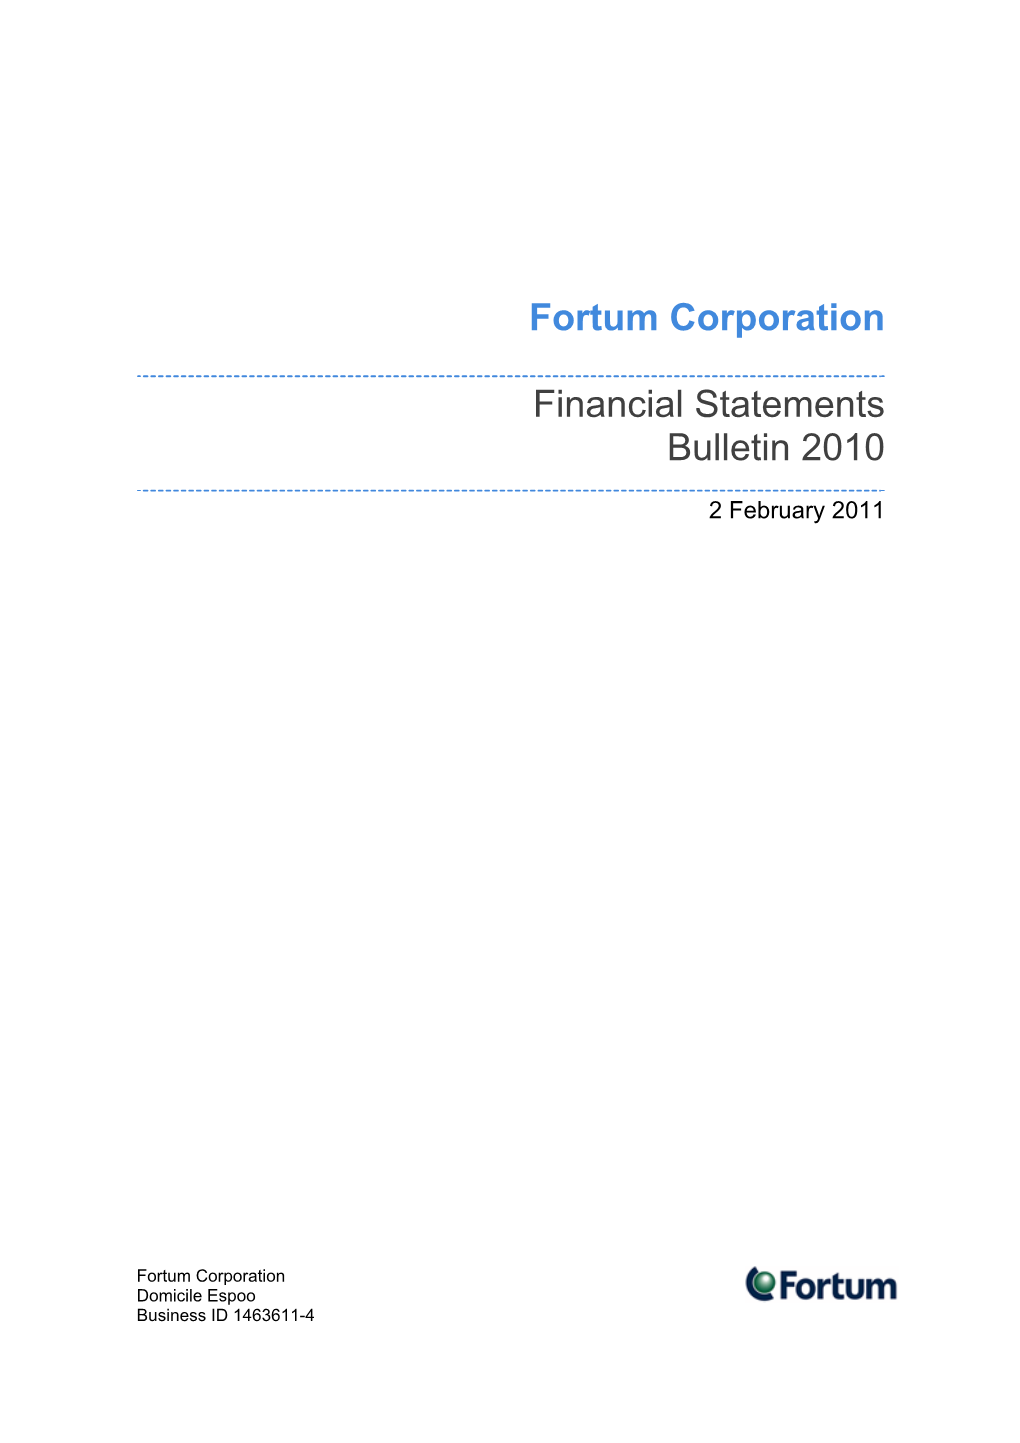 Fortum Corporation Financial Statements Bulletin 2010 2 February 2011 at 9:00 EET